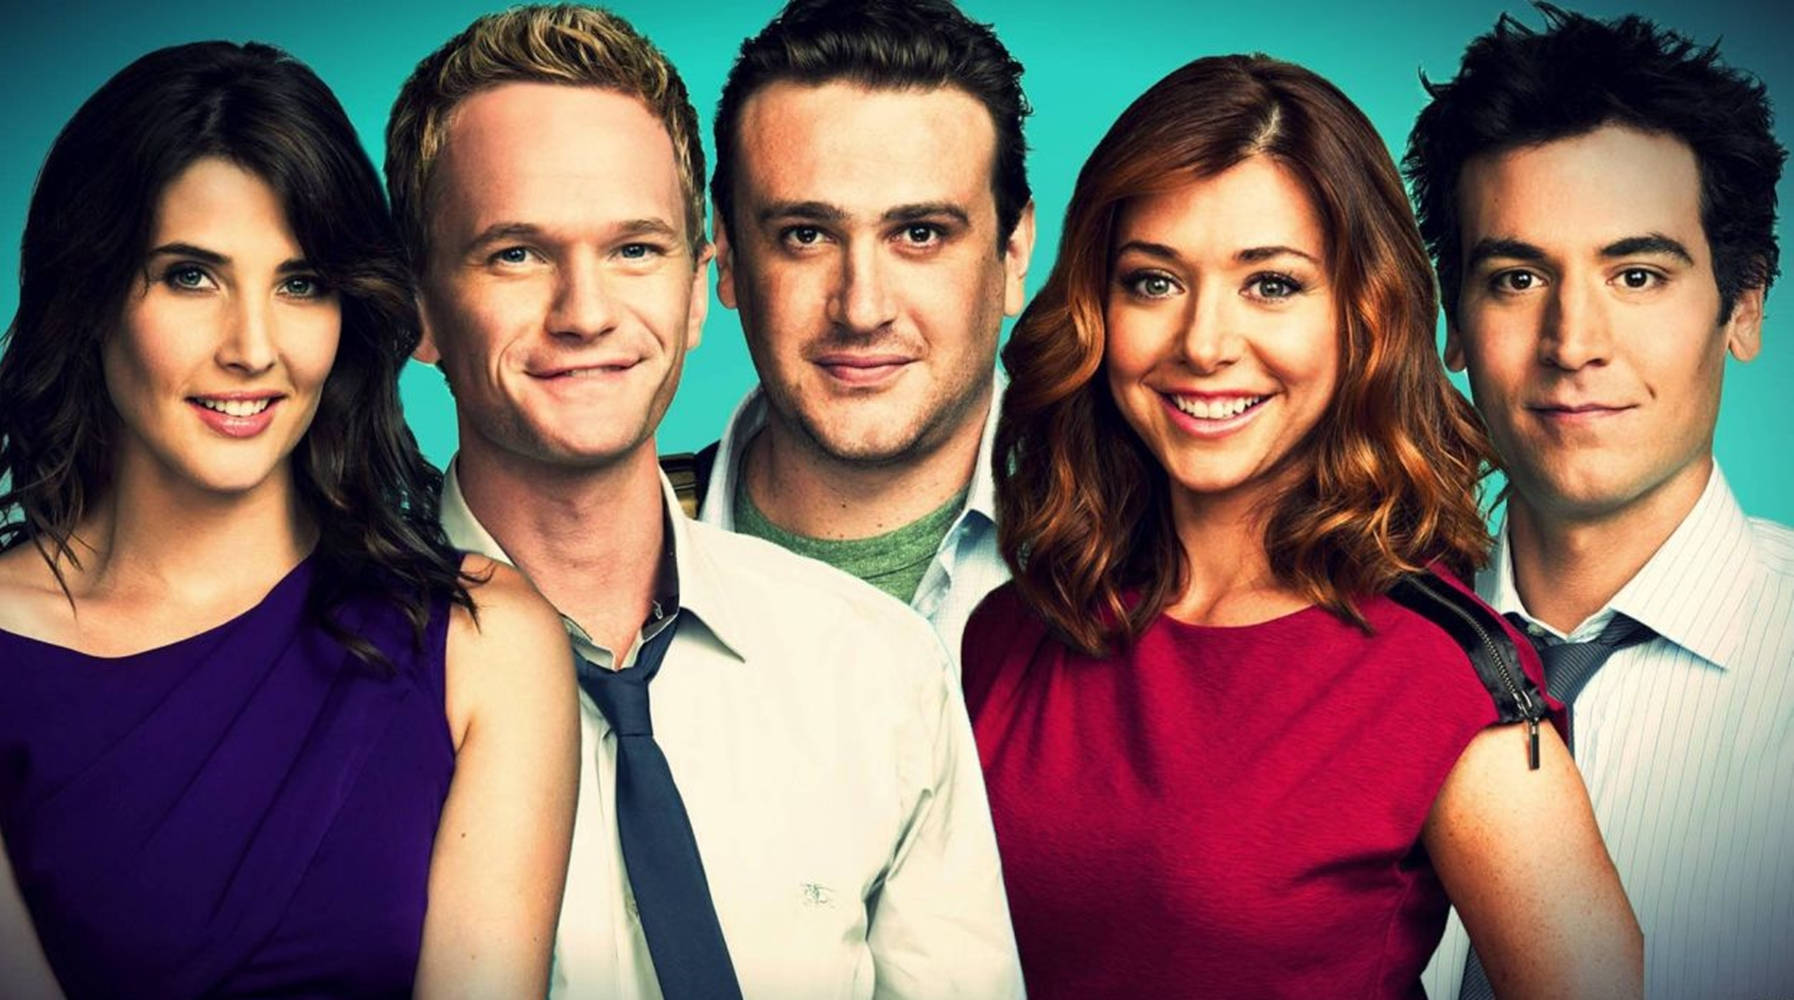 The central characters of the hit TV show "How I Met Your Mother" Wallpaper